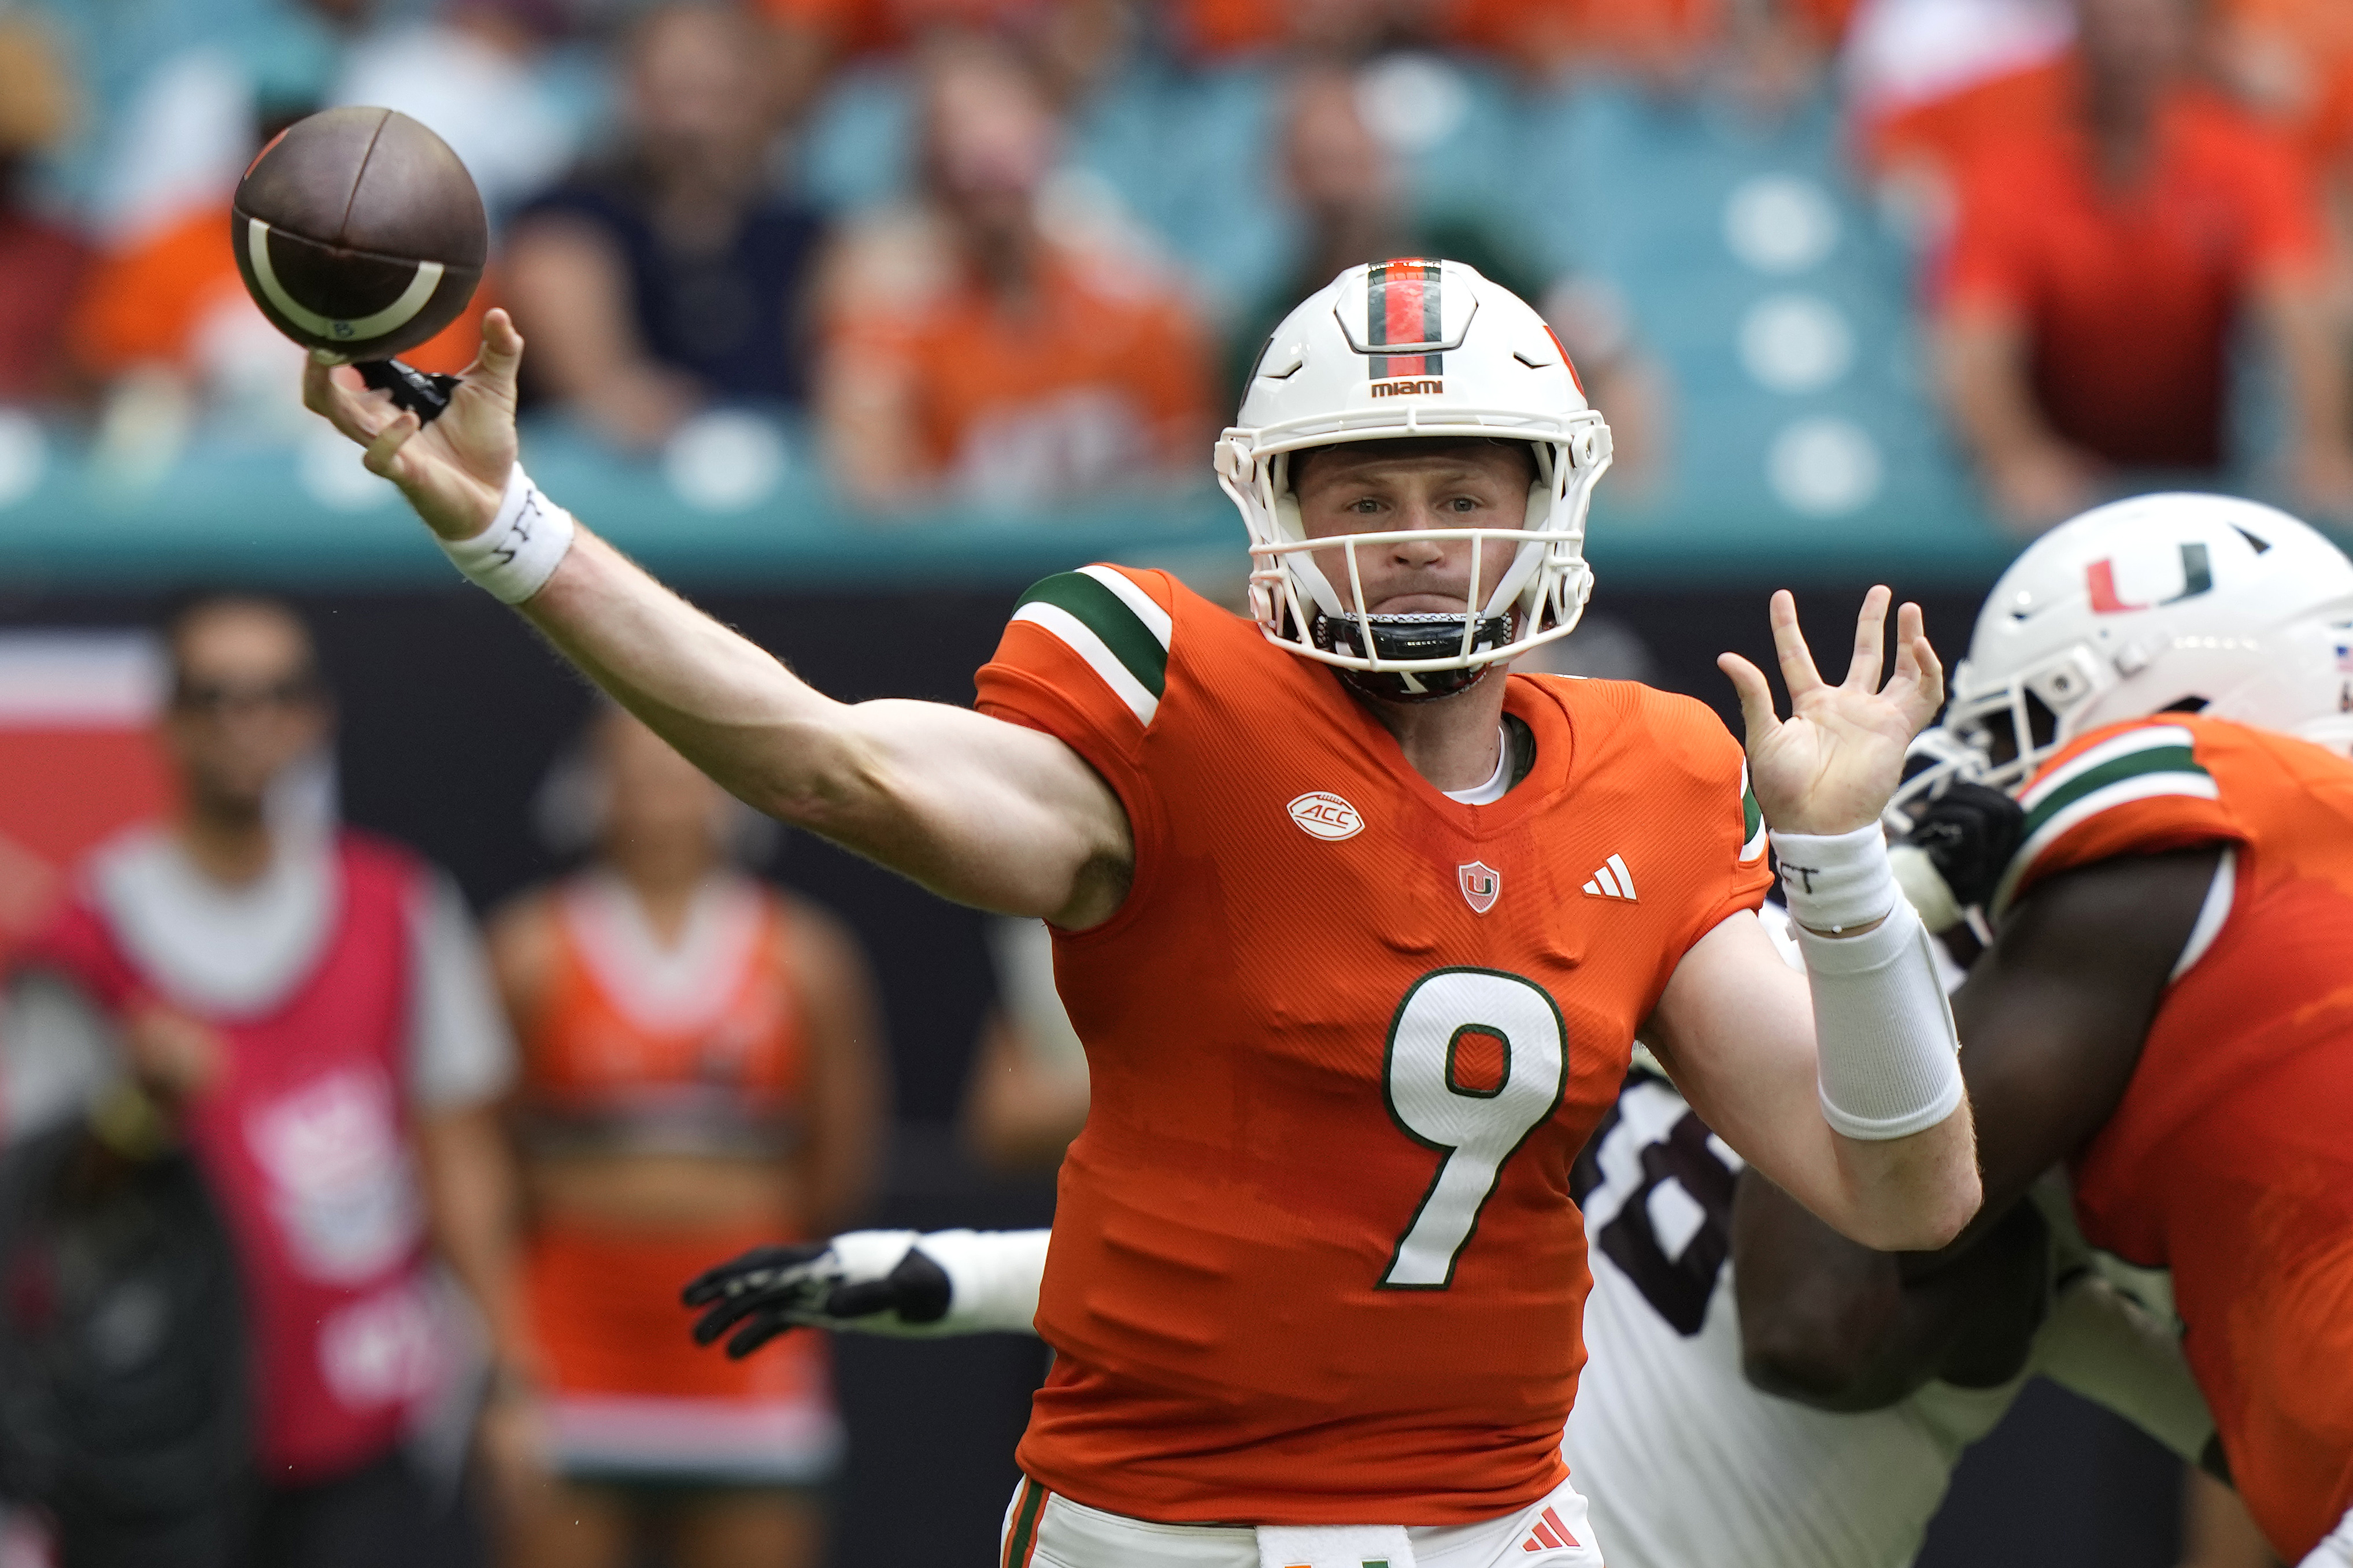 Hurricanes Lose Game One To Gators